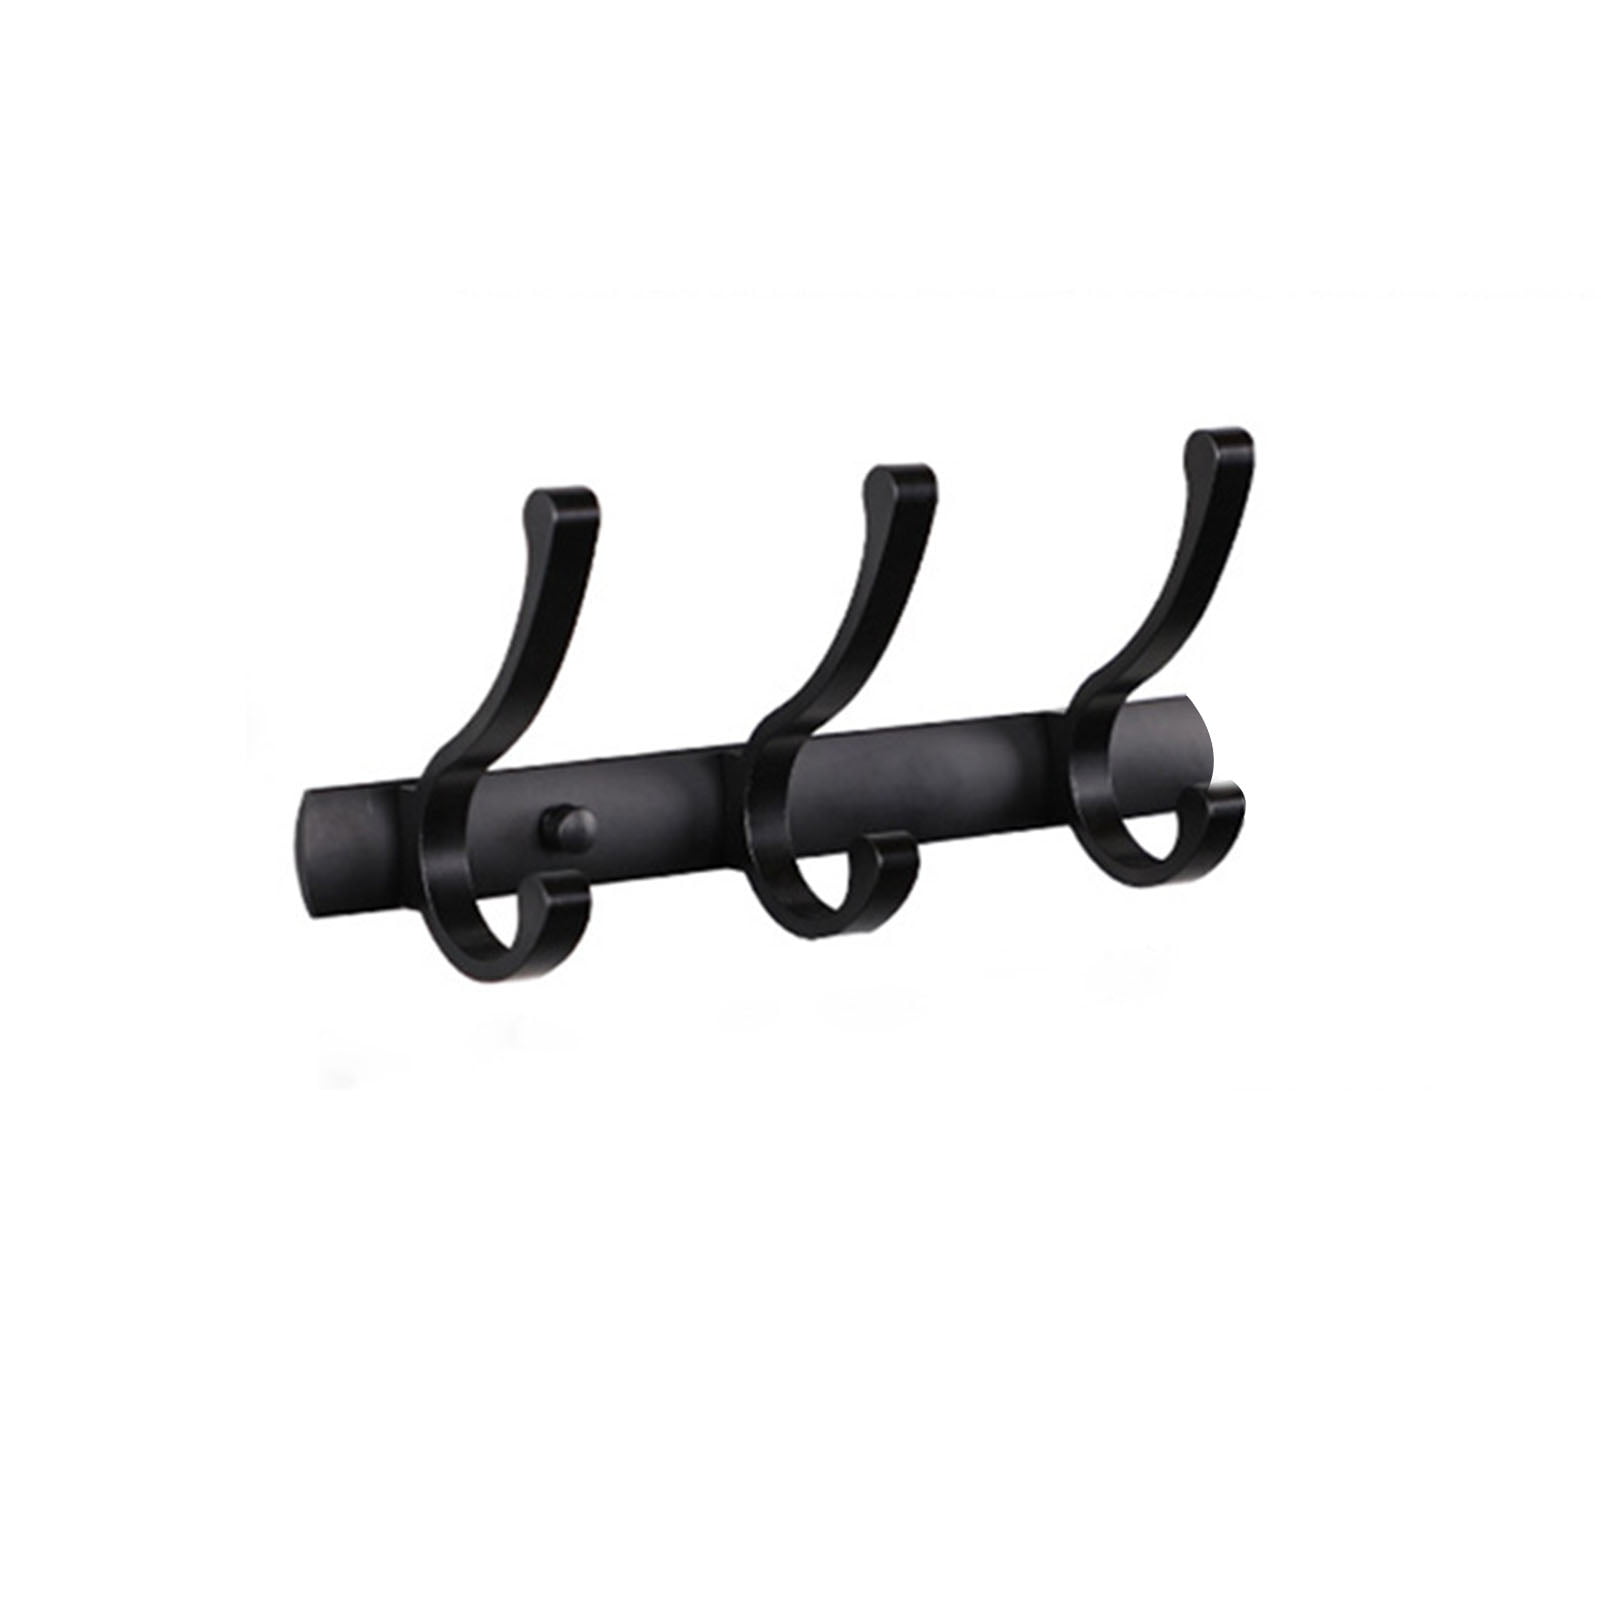 Details about   Fellowes Wire Partition Additions Plastic Double Coat Hook Black 423889 75510 